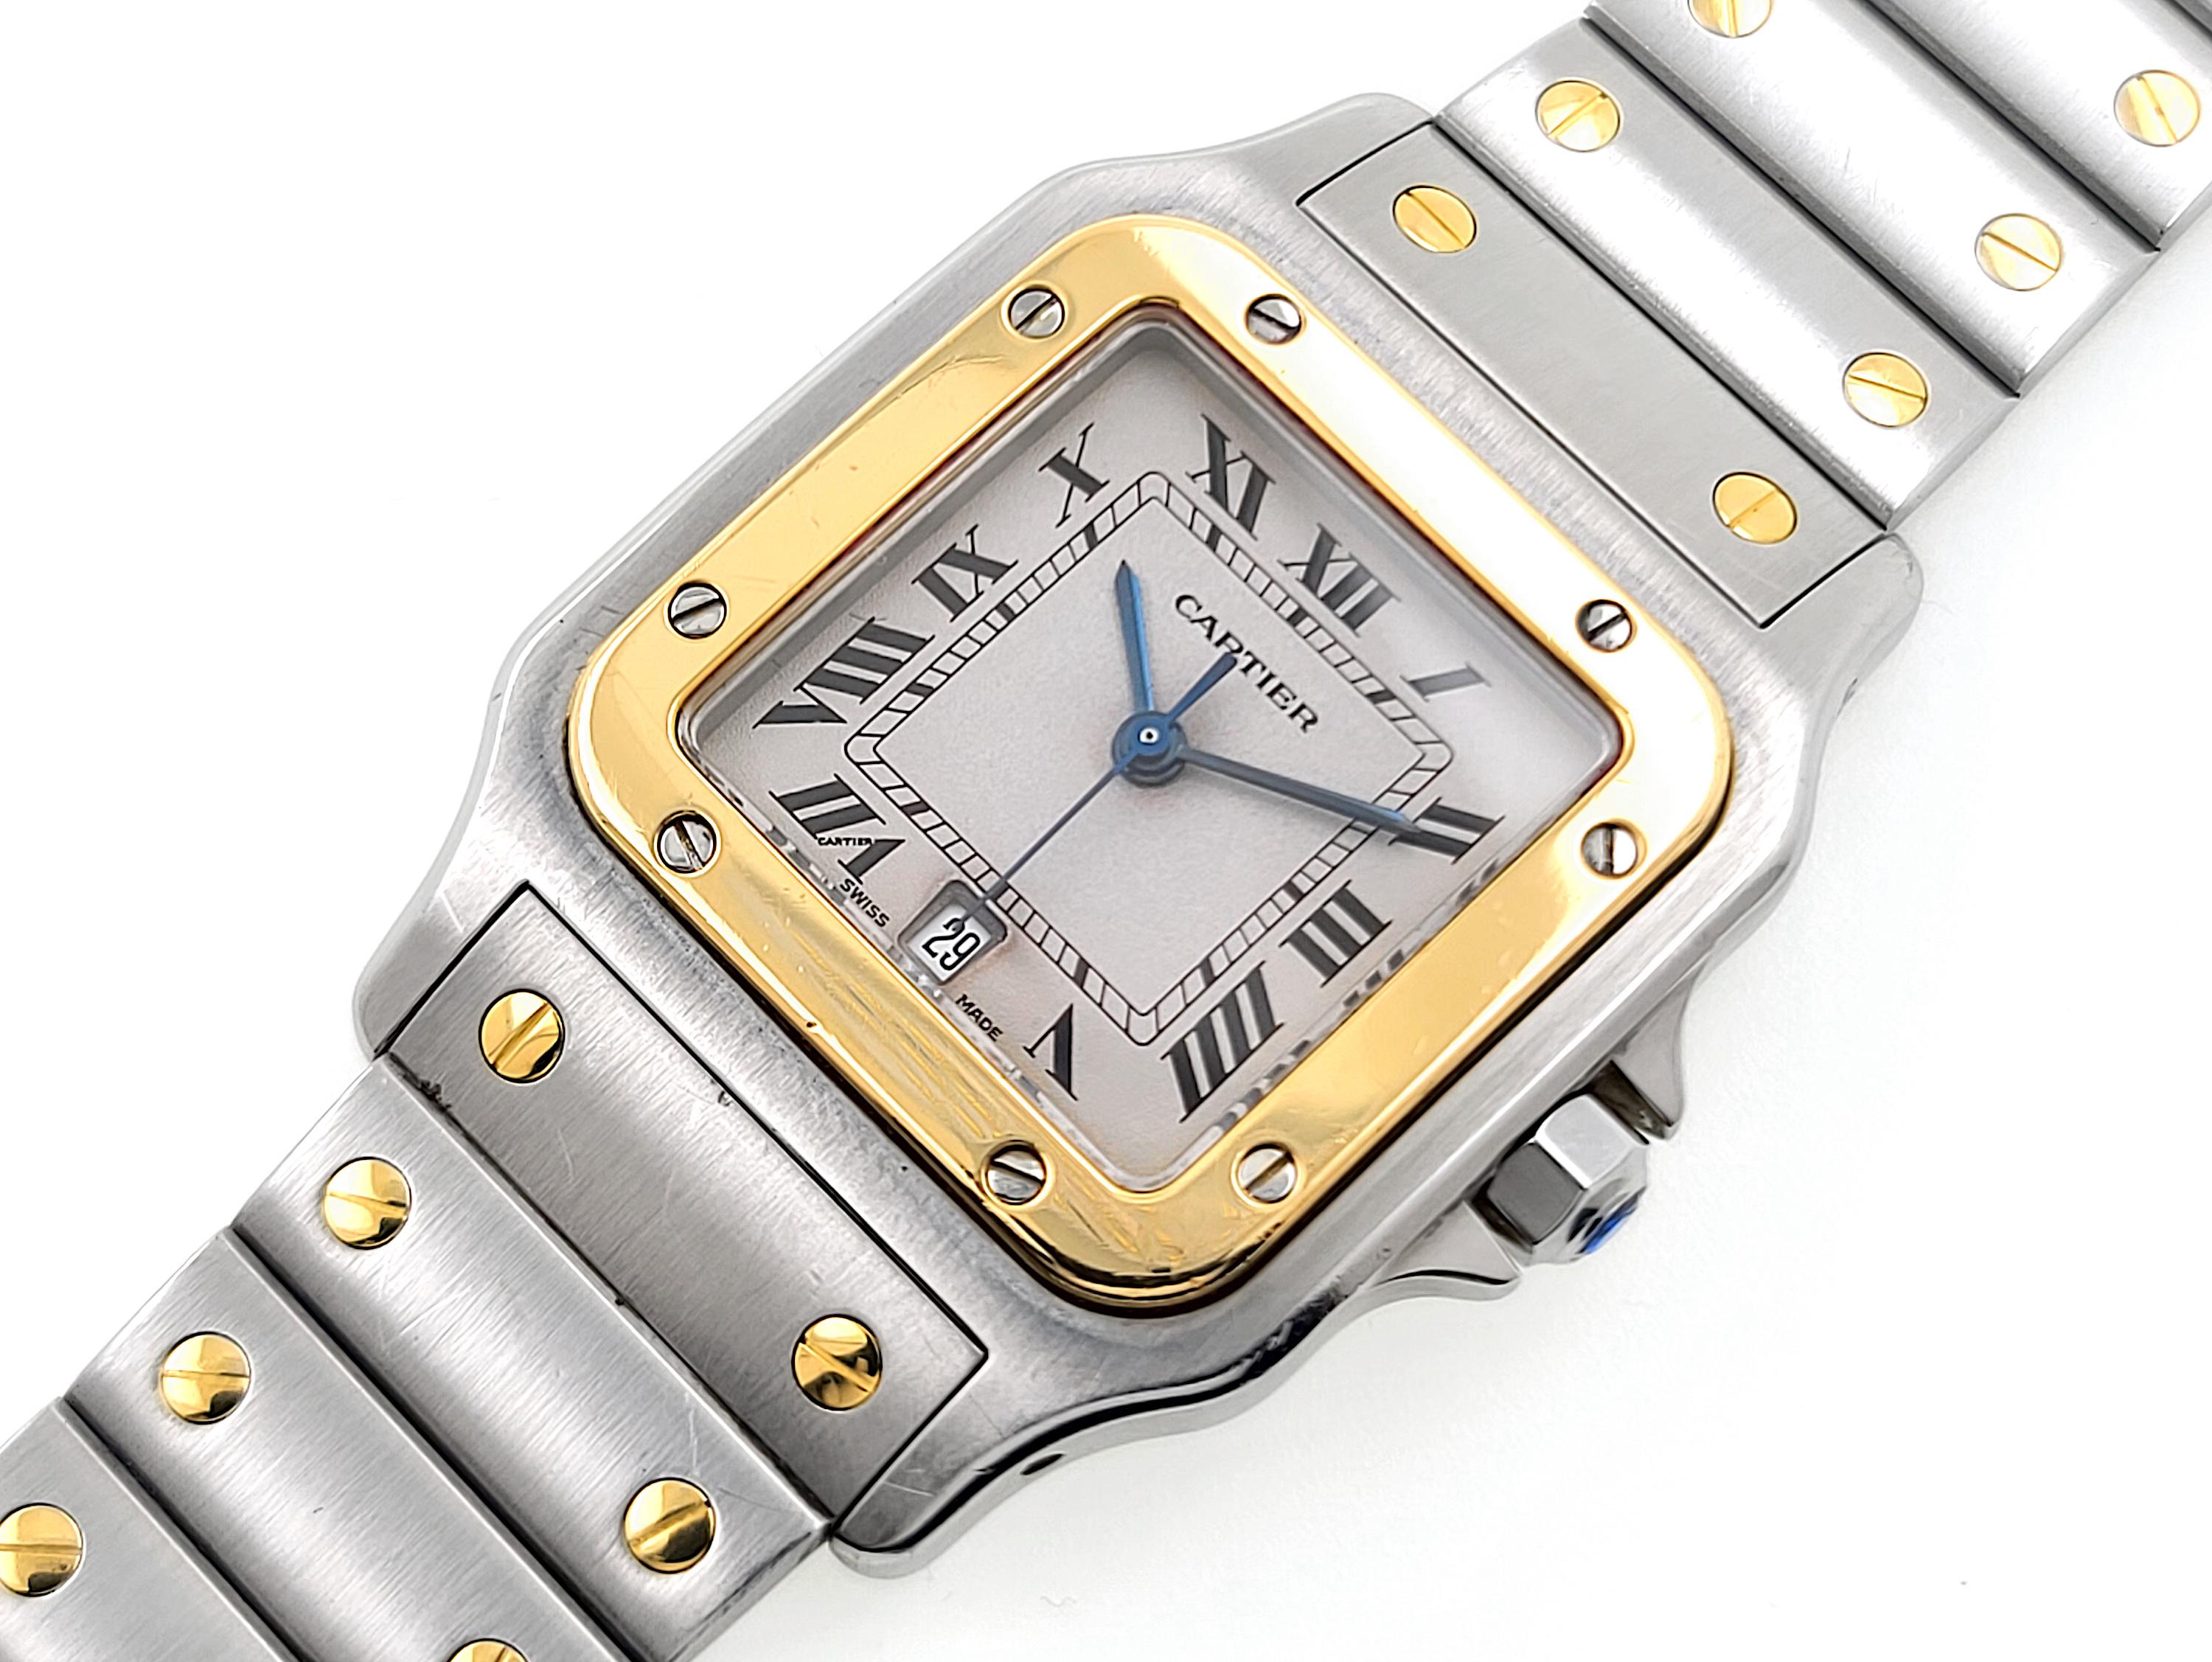 Cabochon Cartier Santos Galbee Date 1566 Large LM GM 18k Gold Stainless Steel Carree